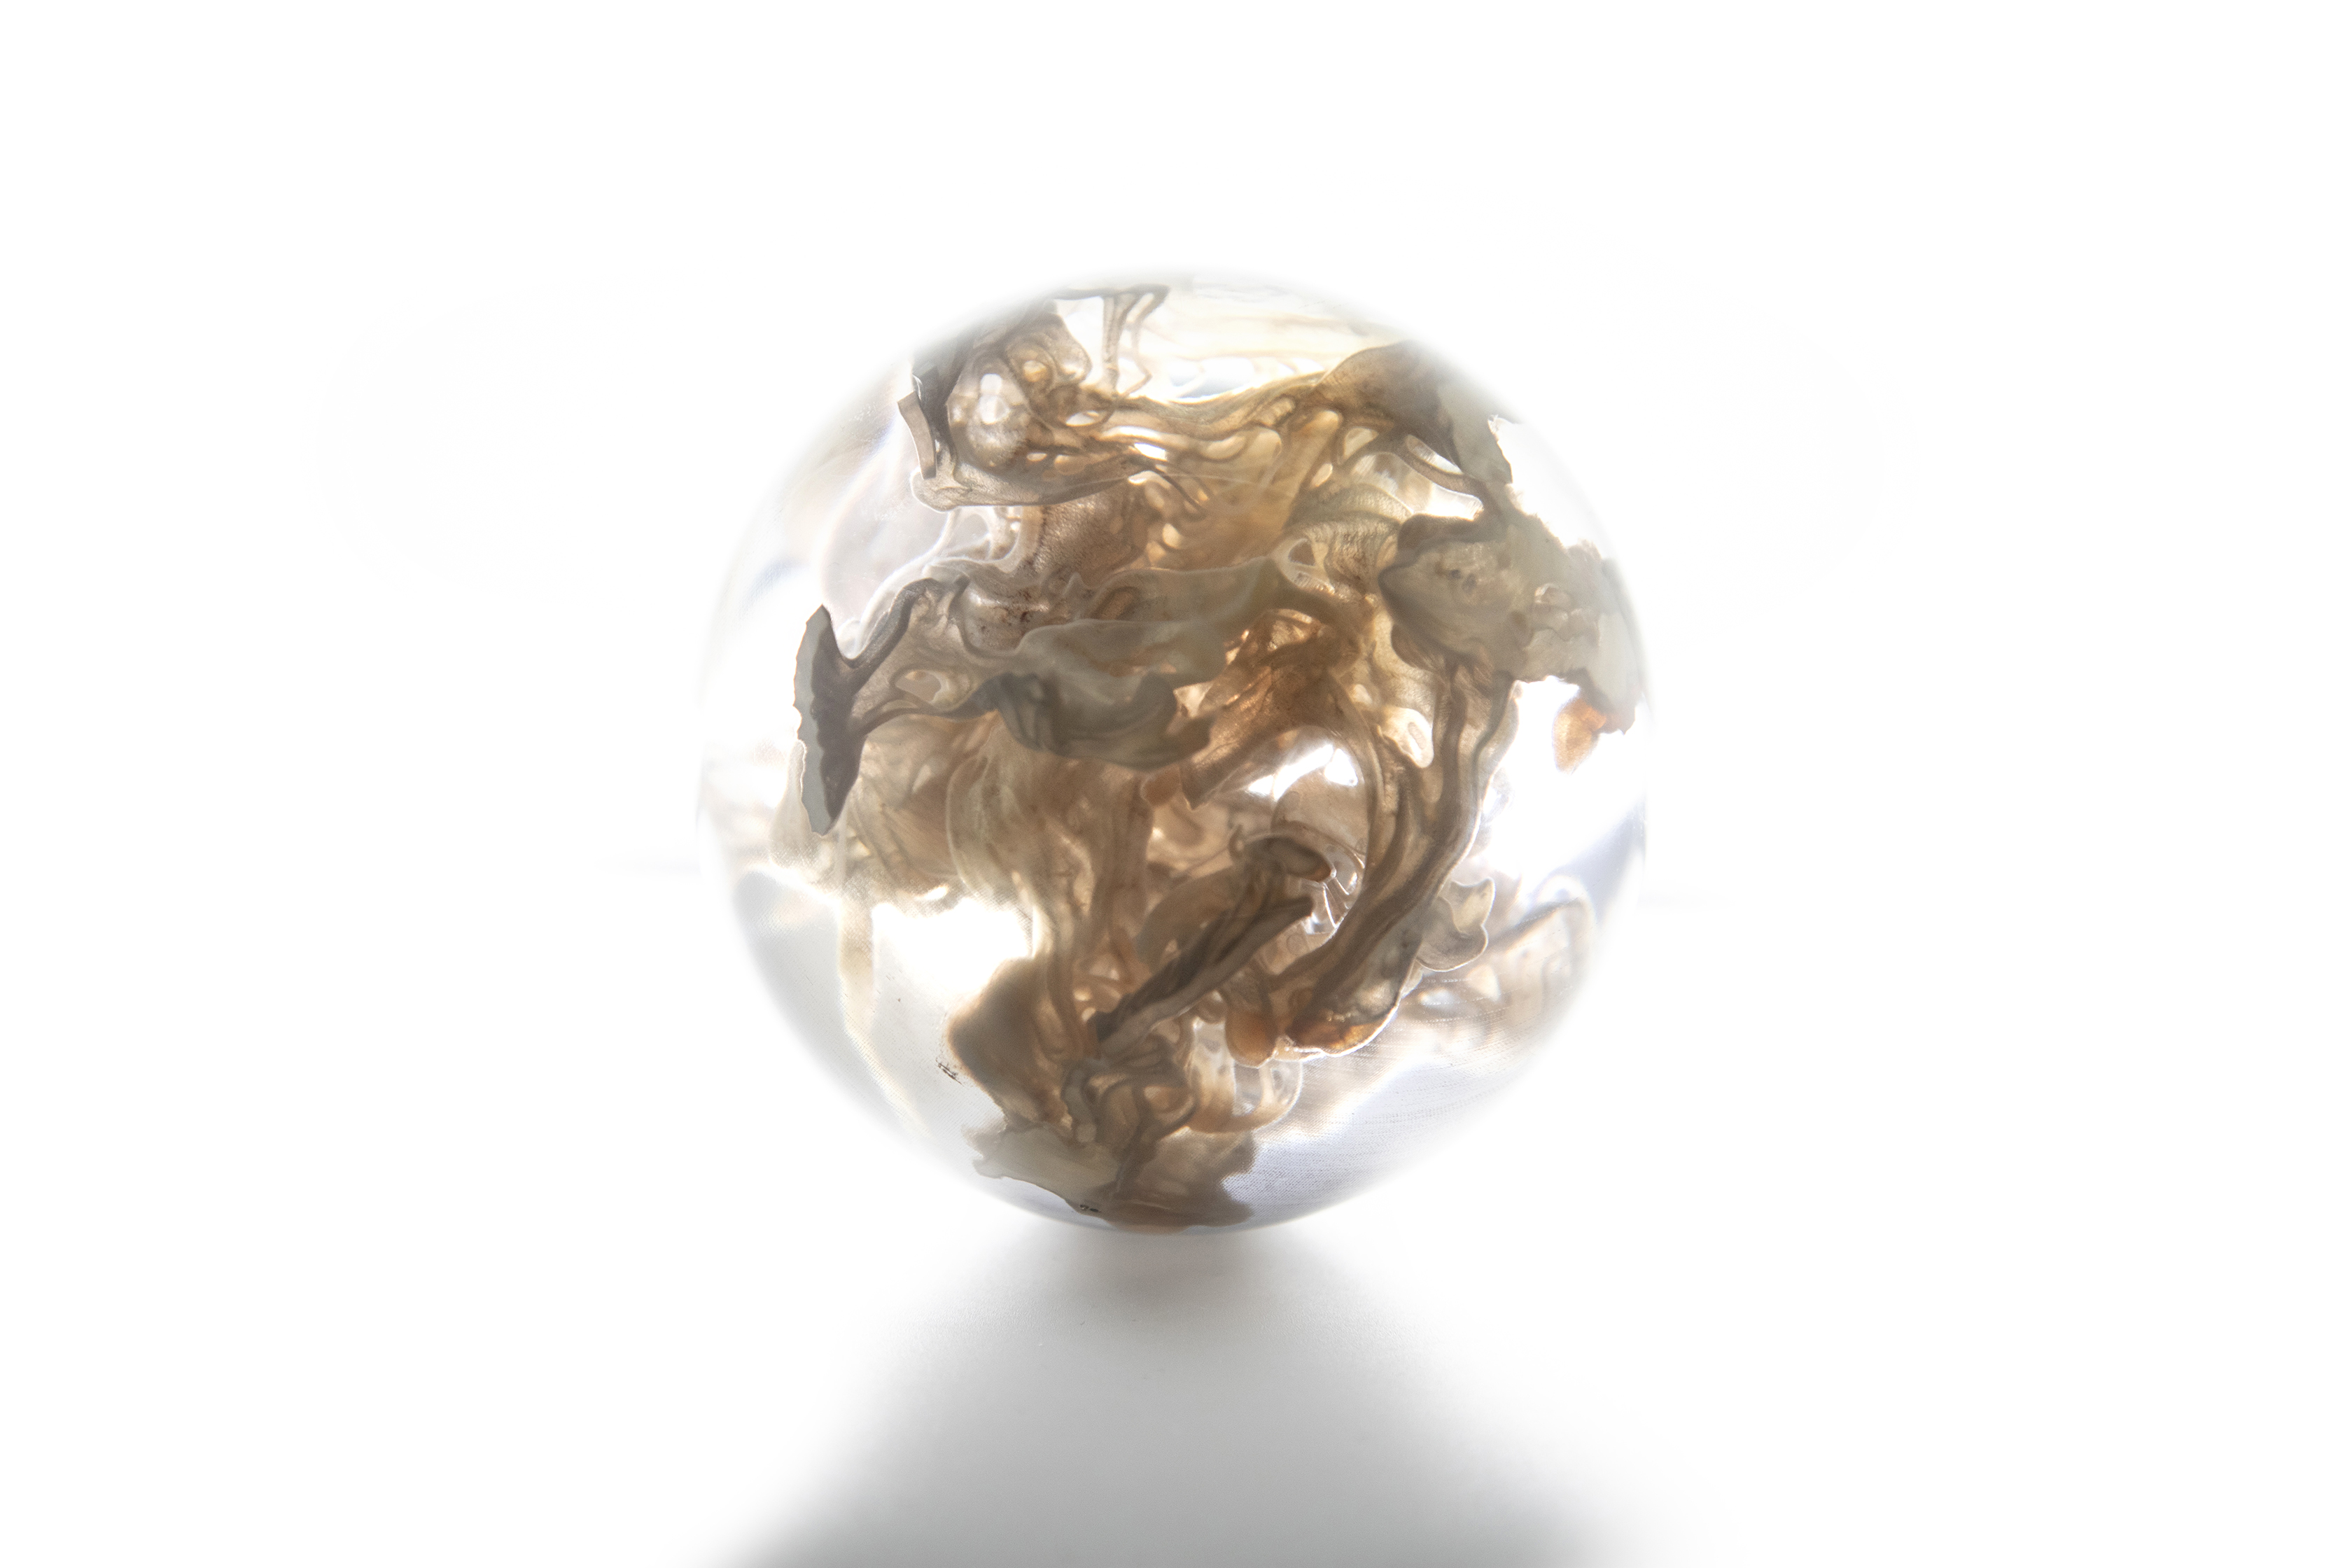 3D printed orbs containing liquid melanin. Image via Neri Oxman and the Mediated Matter Group.